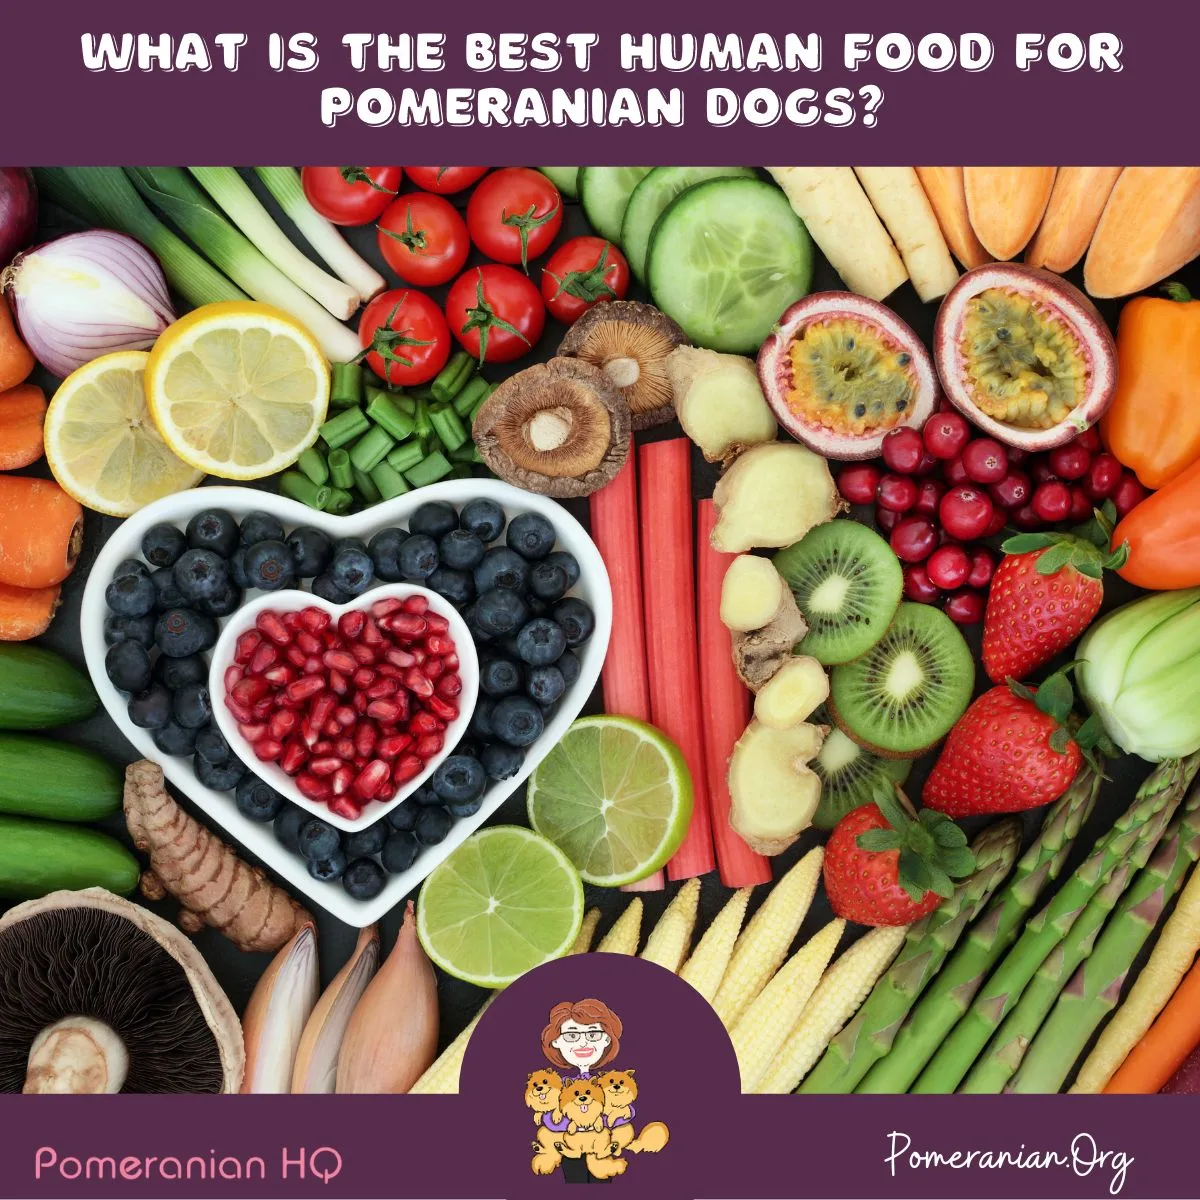 Best Human Food for Pomeranian Dogs